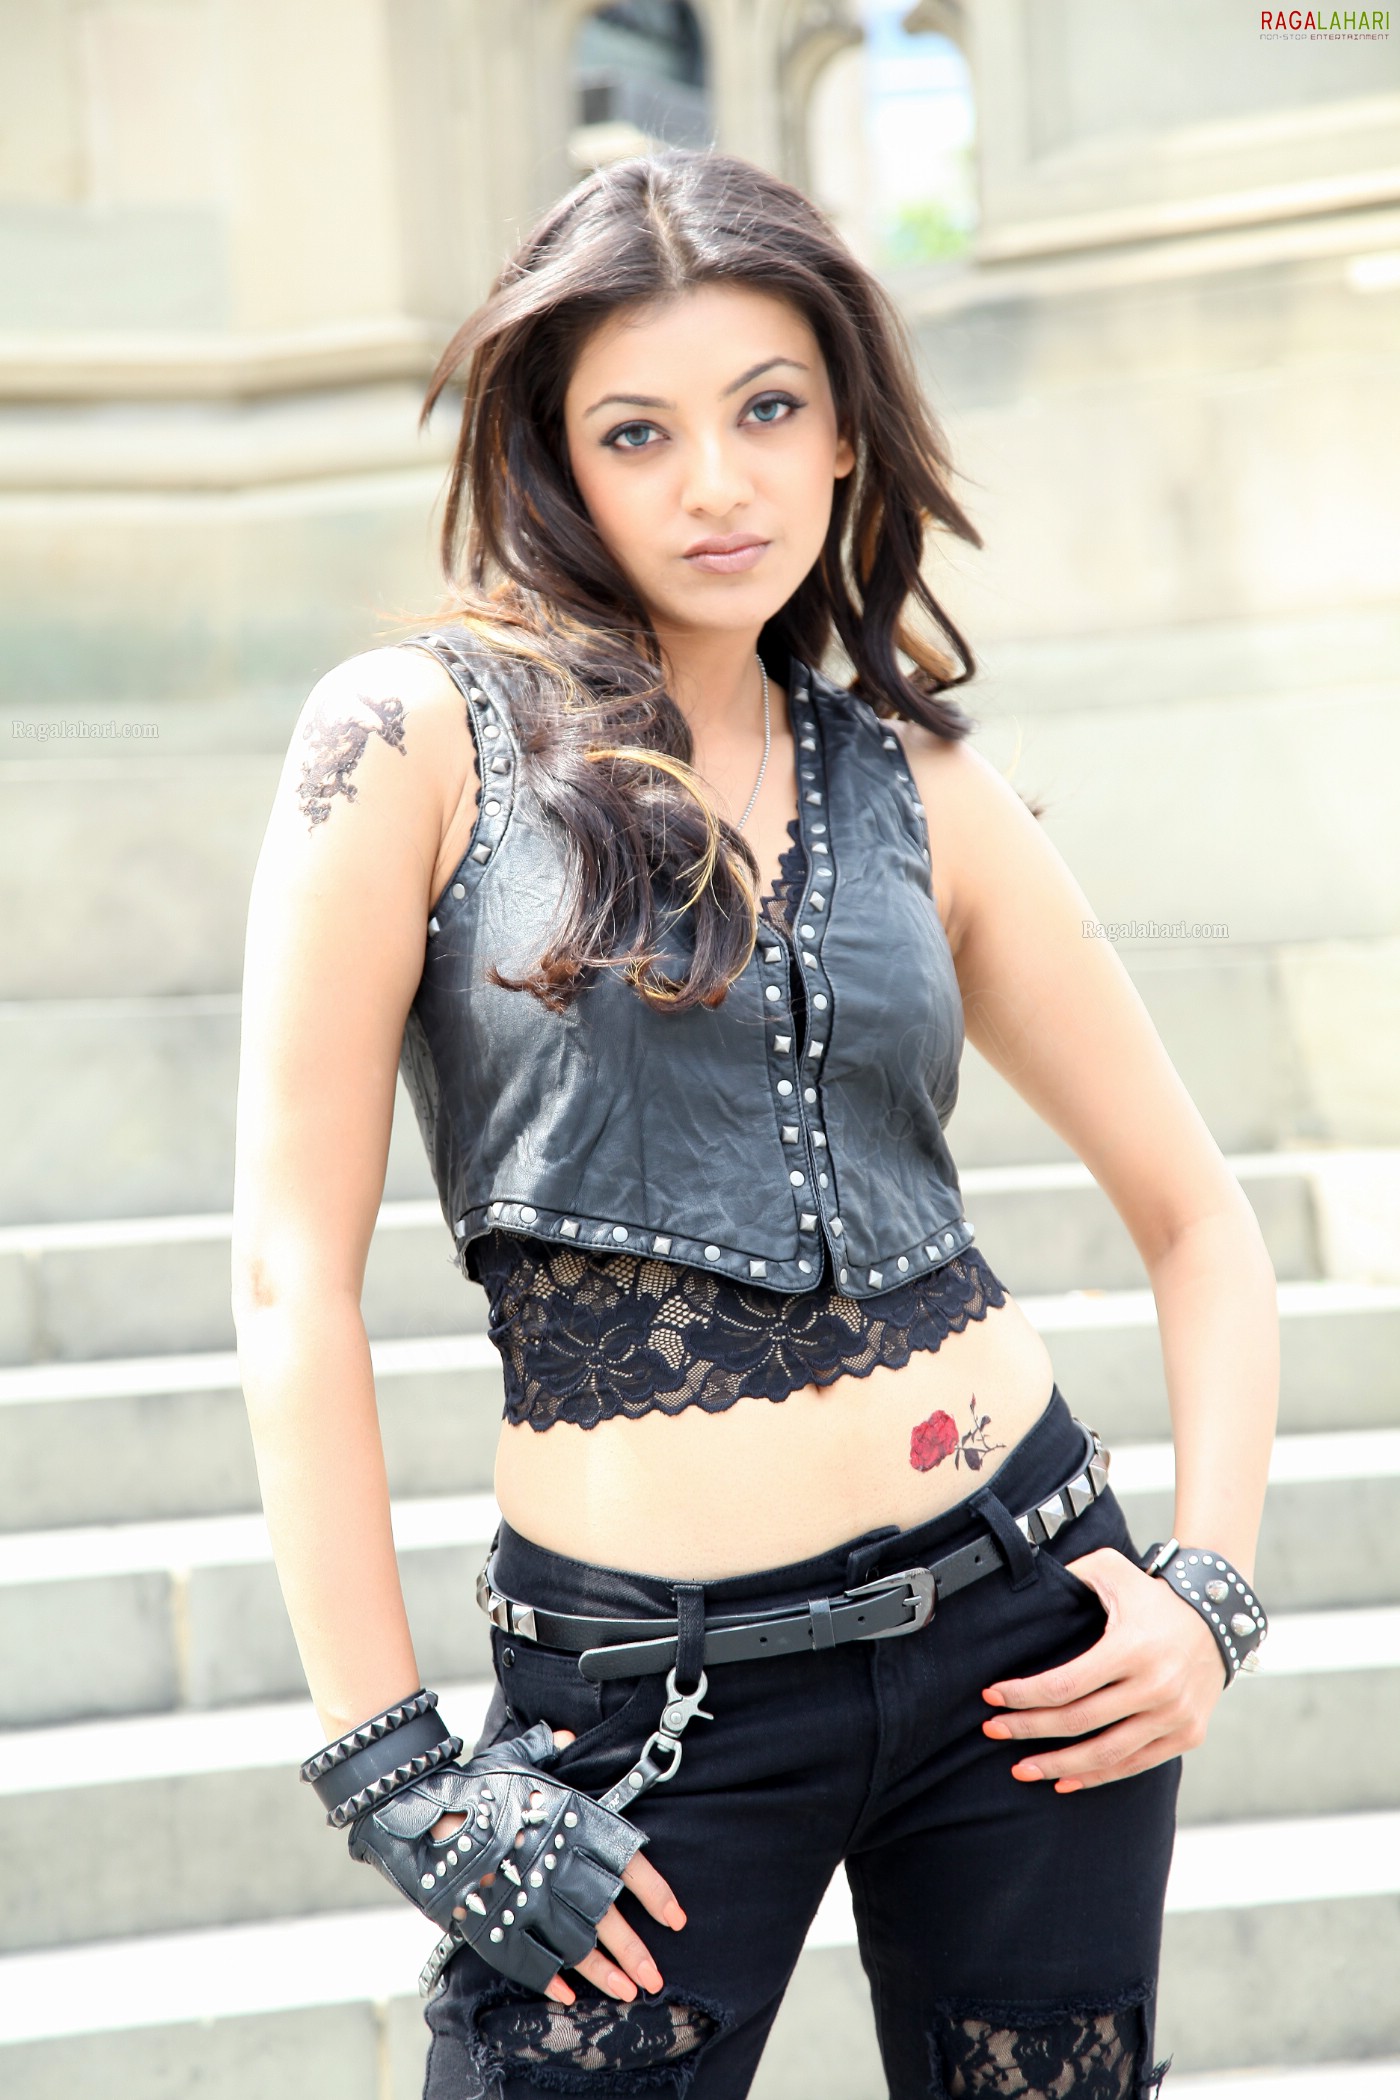 Kajal Aggarwal Rose Tattoo on her Midriff from Dhada Movie, Gallery, Images